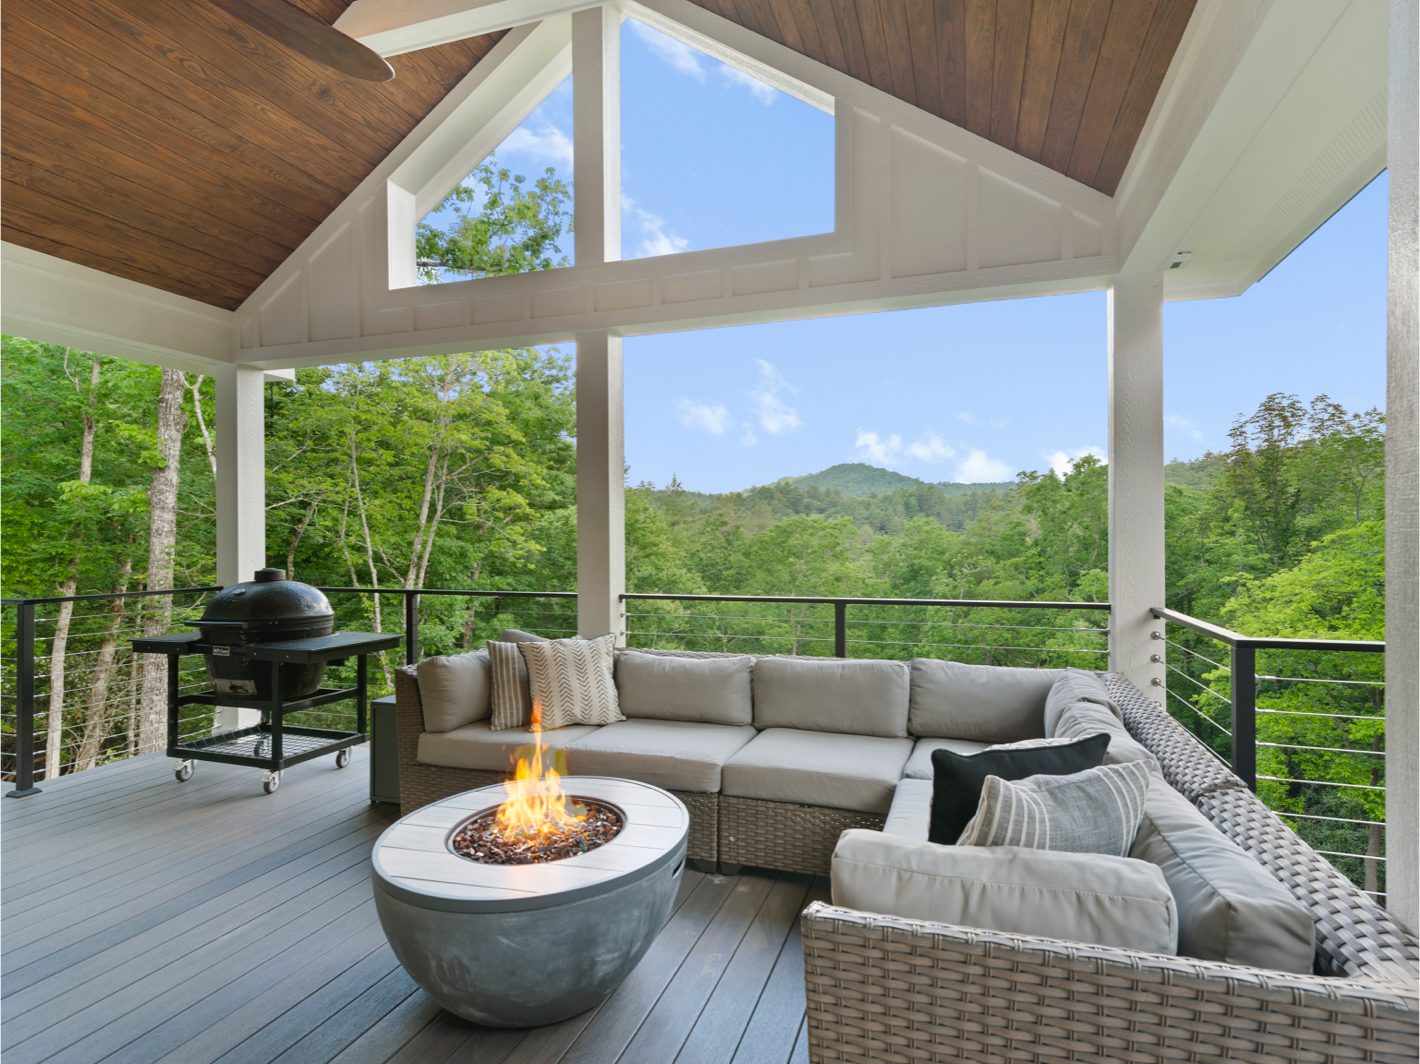 The top deck features an outdoor sectional sofa with an enclosed fire pit and a grill.